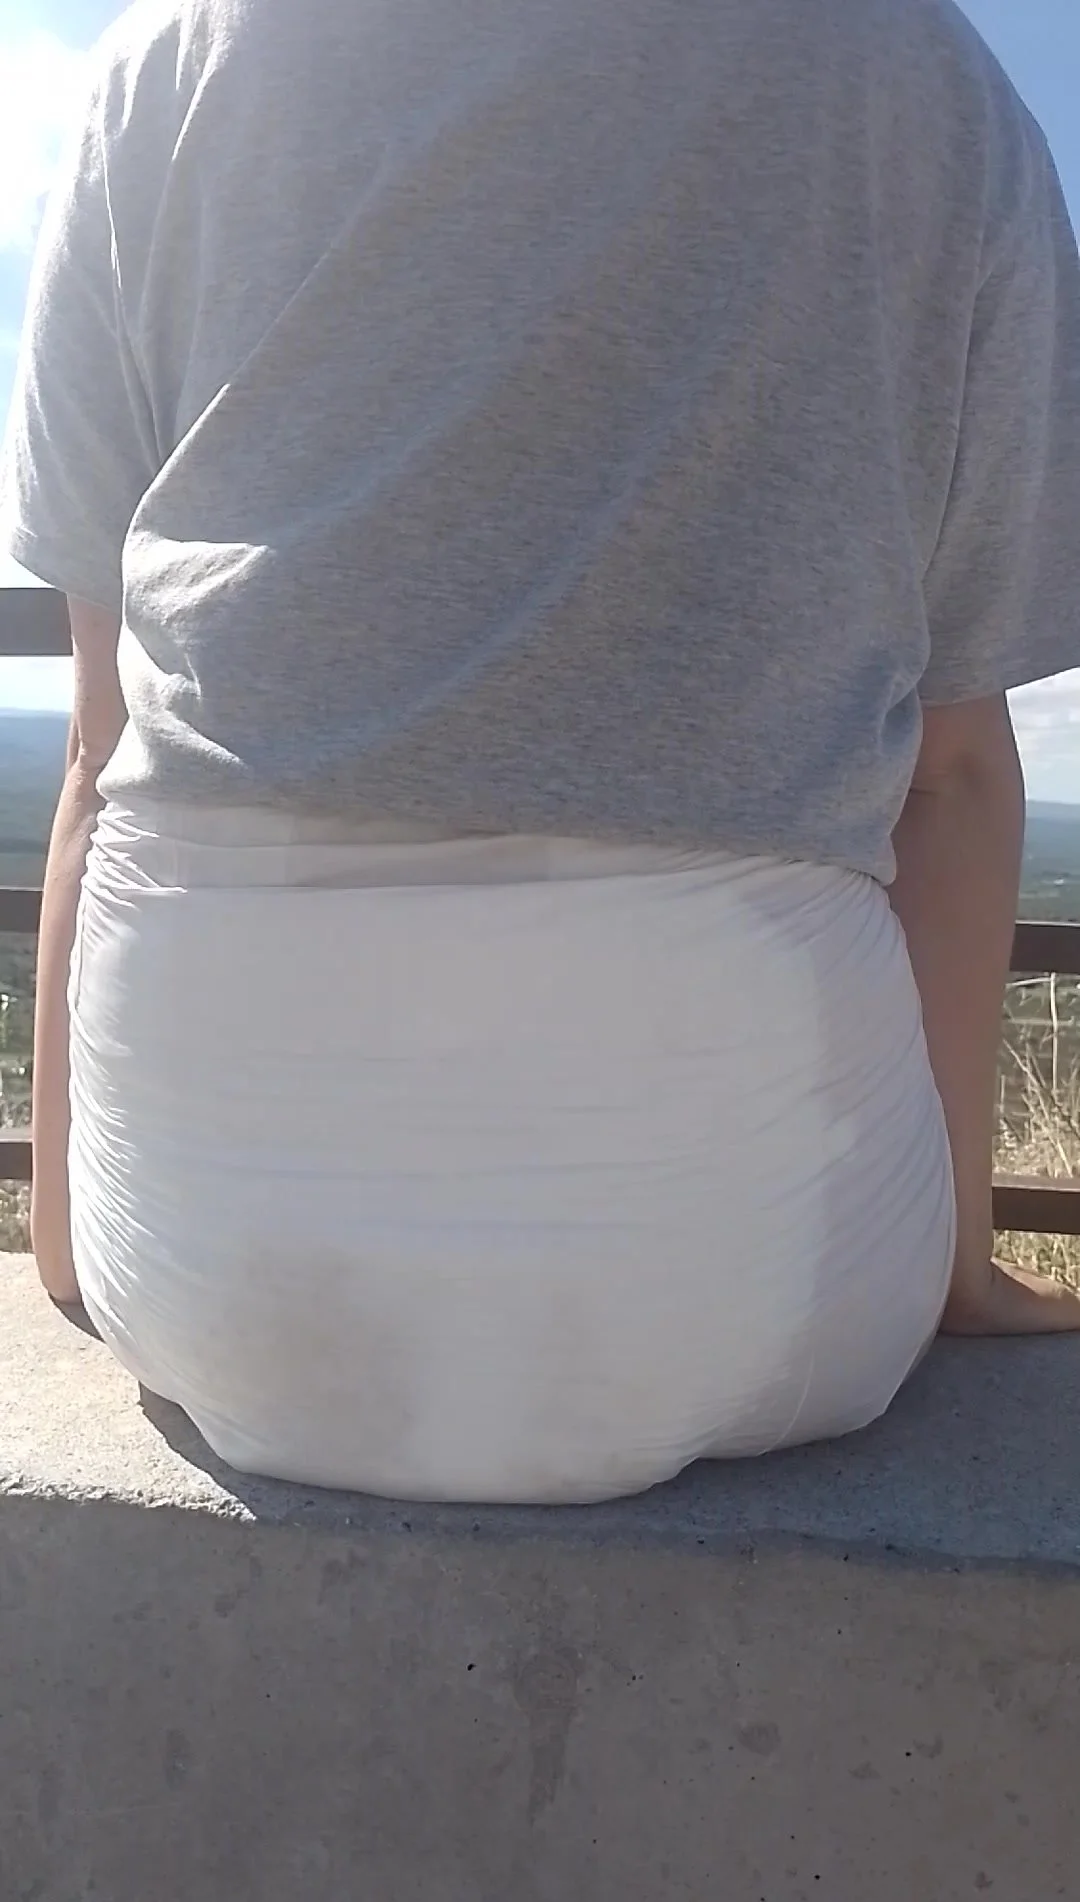 Girl walks in public with visibly wet diaper